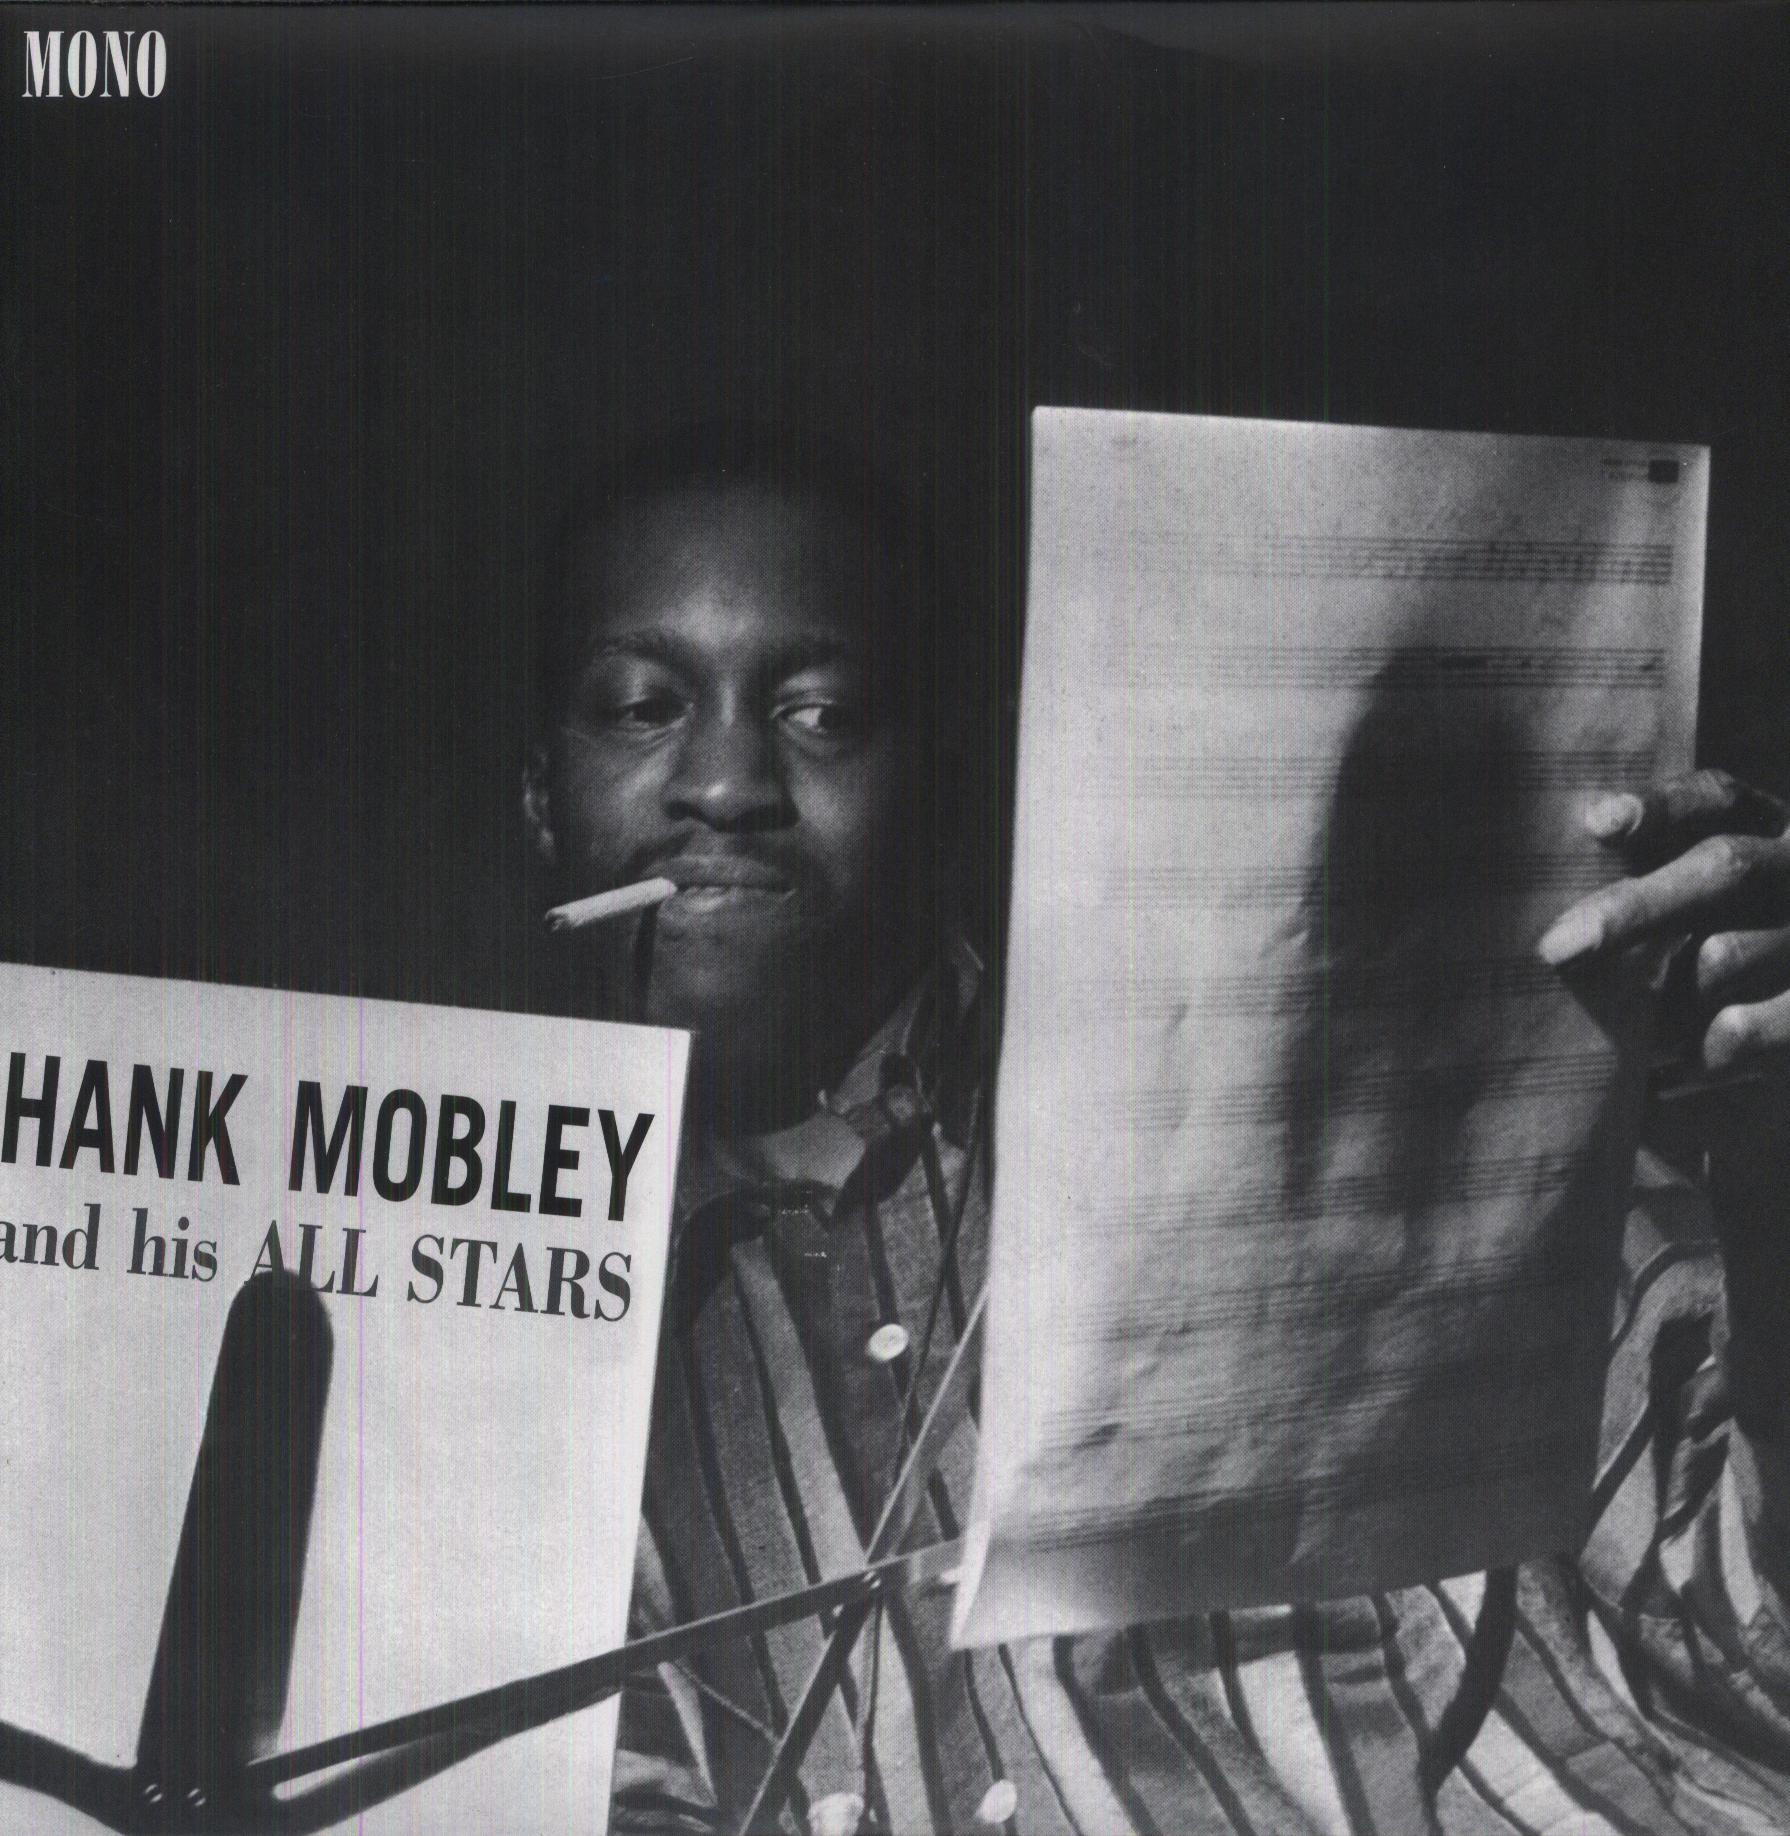 HANK MOBLEY & HIS ALL STARS